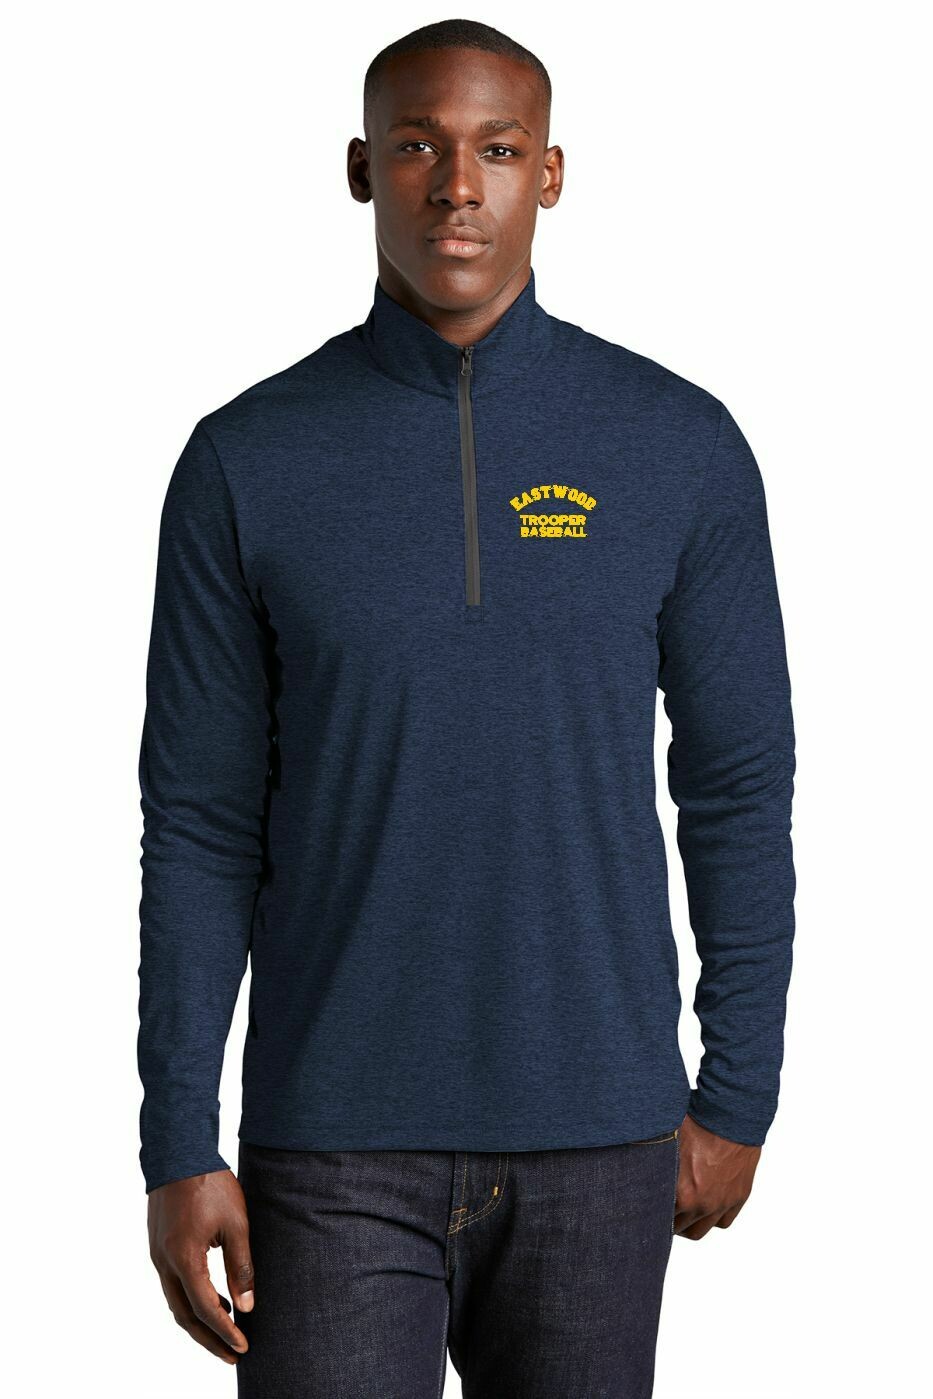 EastWood Long Sleeve warm up EMBROIDERED LEFT CHEST